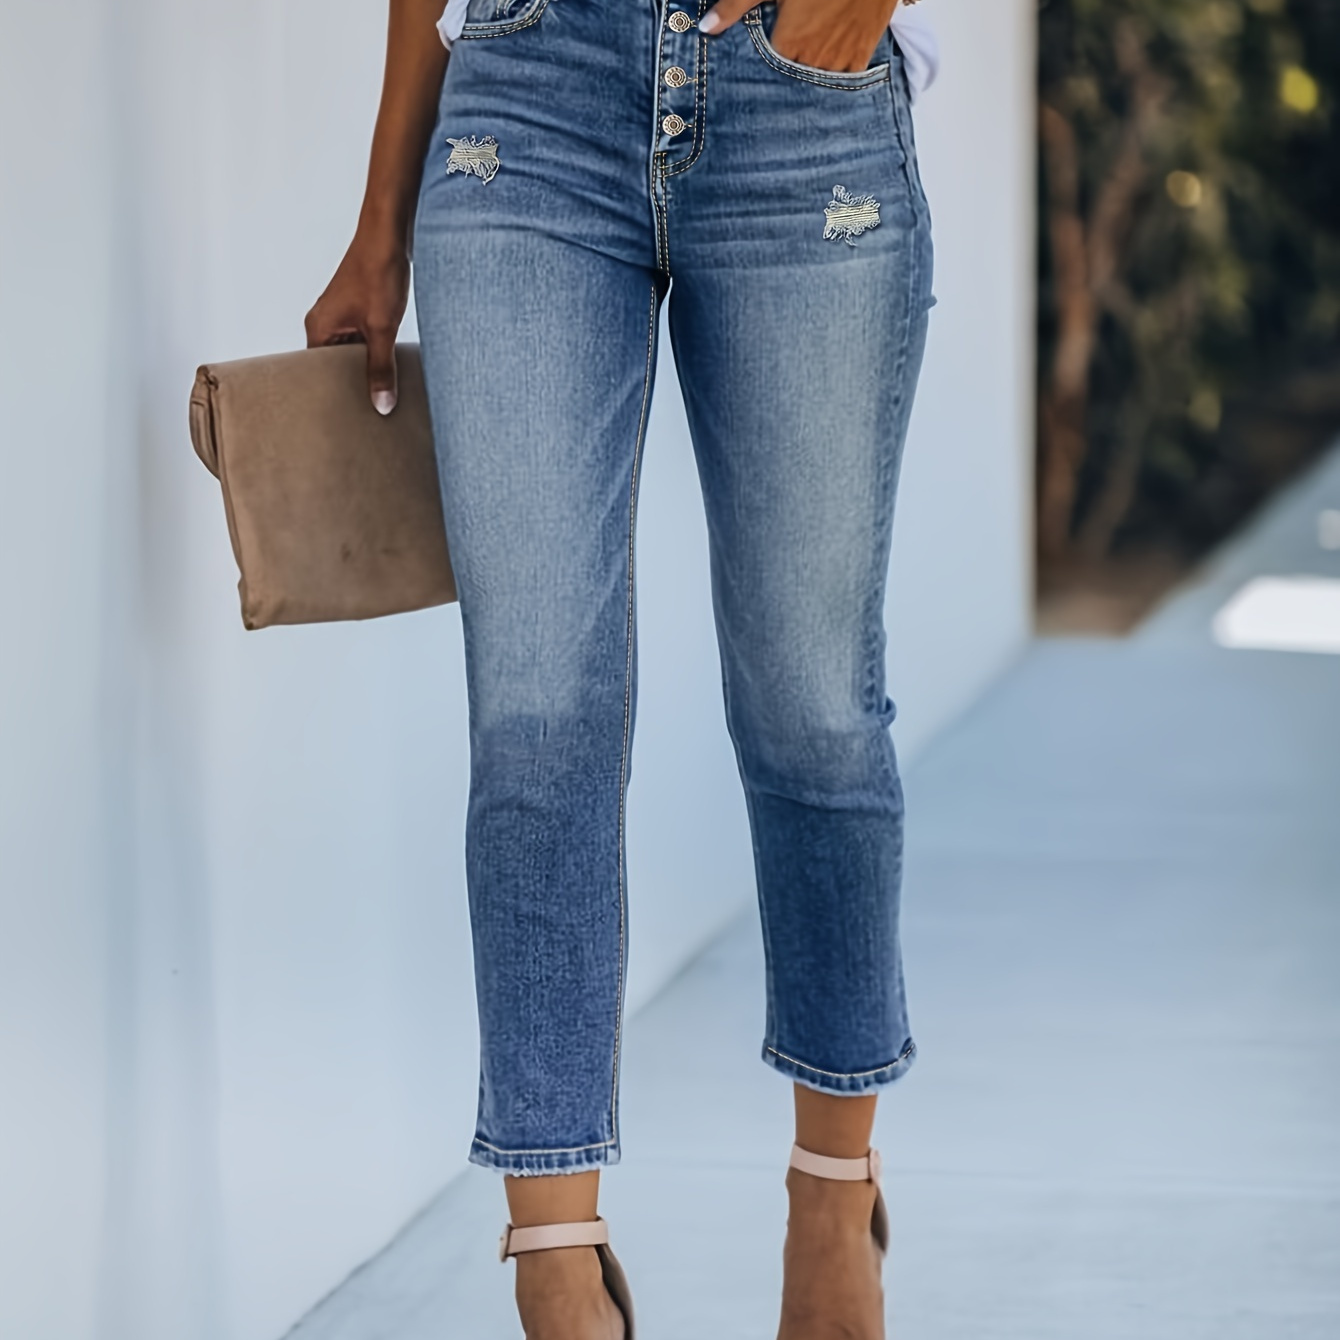 

Ripped Single-breasted Slim Fit Jens, Whiskering Distressed Cropped Denim Pants, Women's Denim Jeans & Clothing